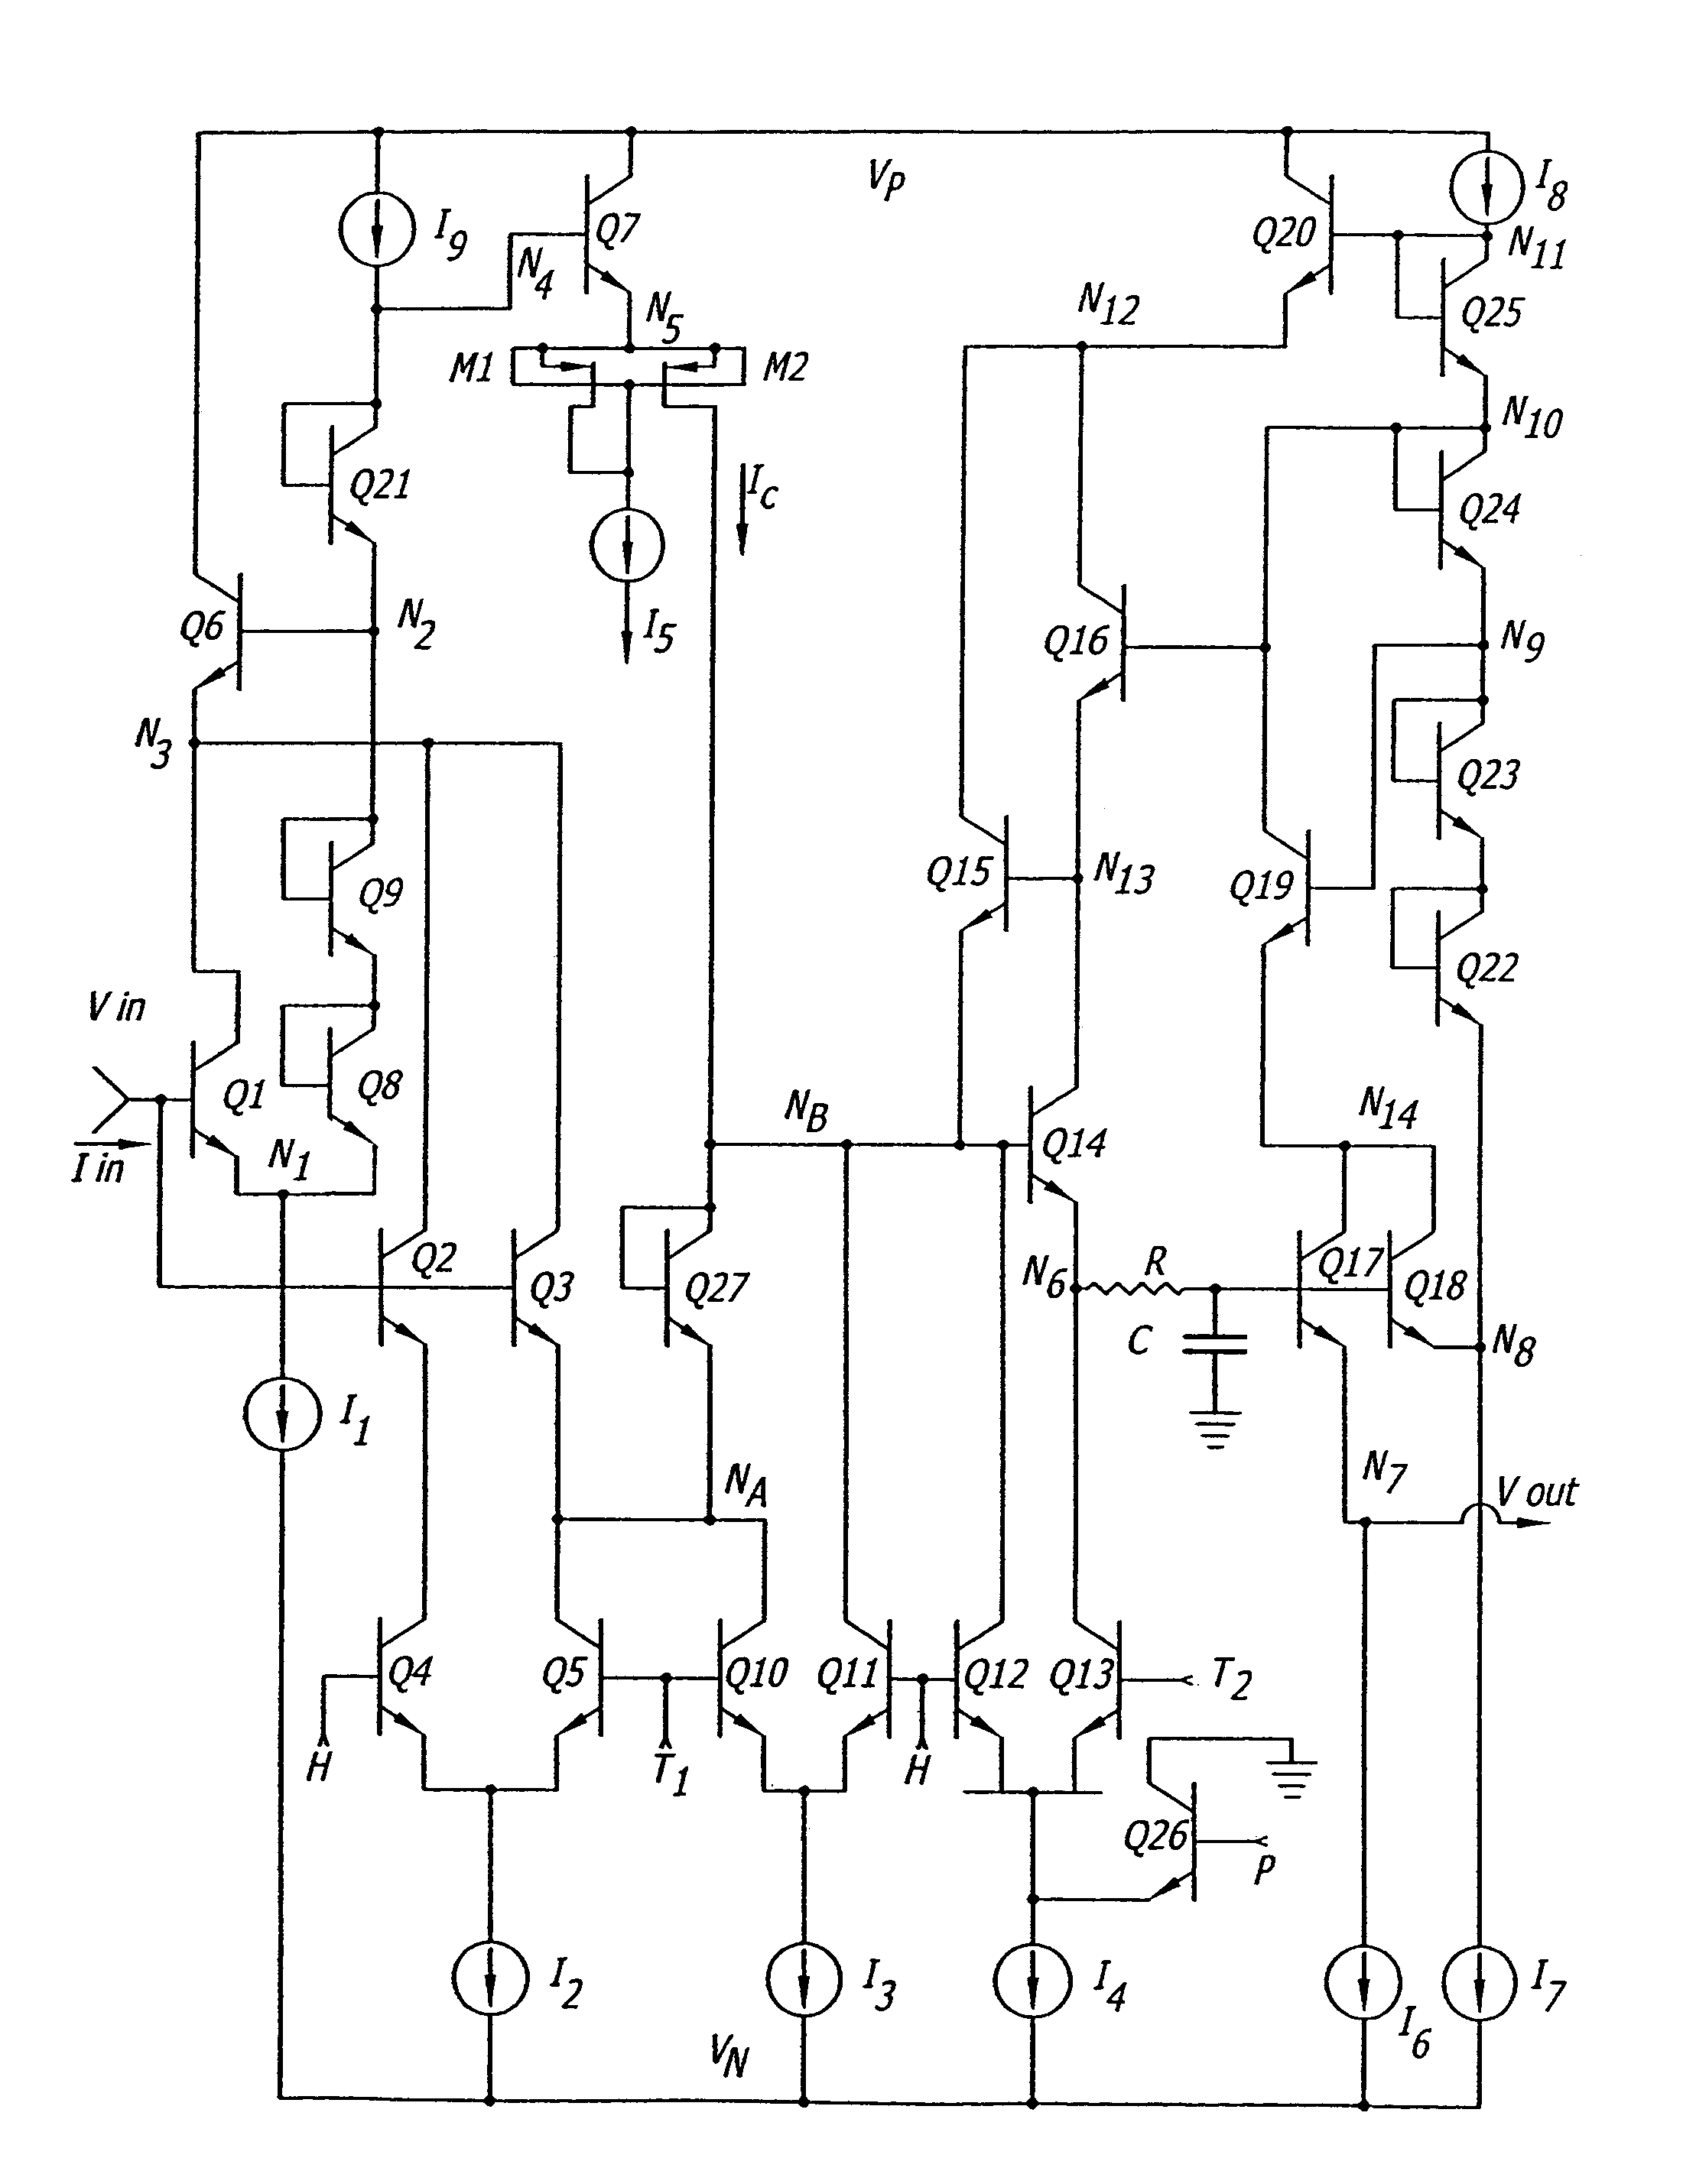 Sample and hold circuit and bootstrapping circuits therefor